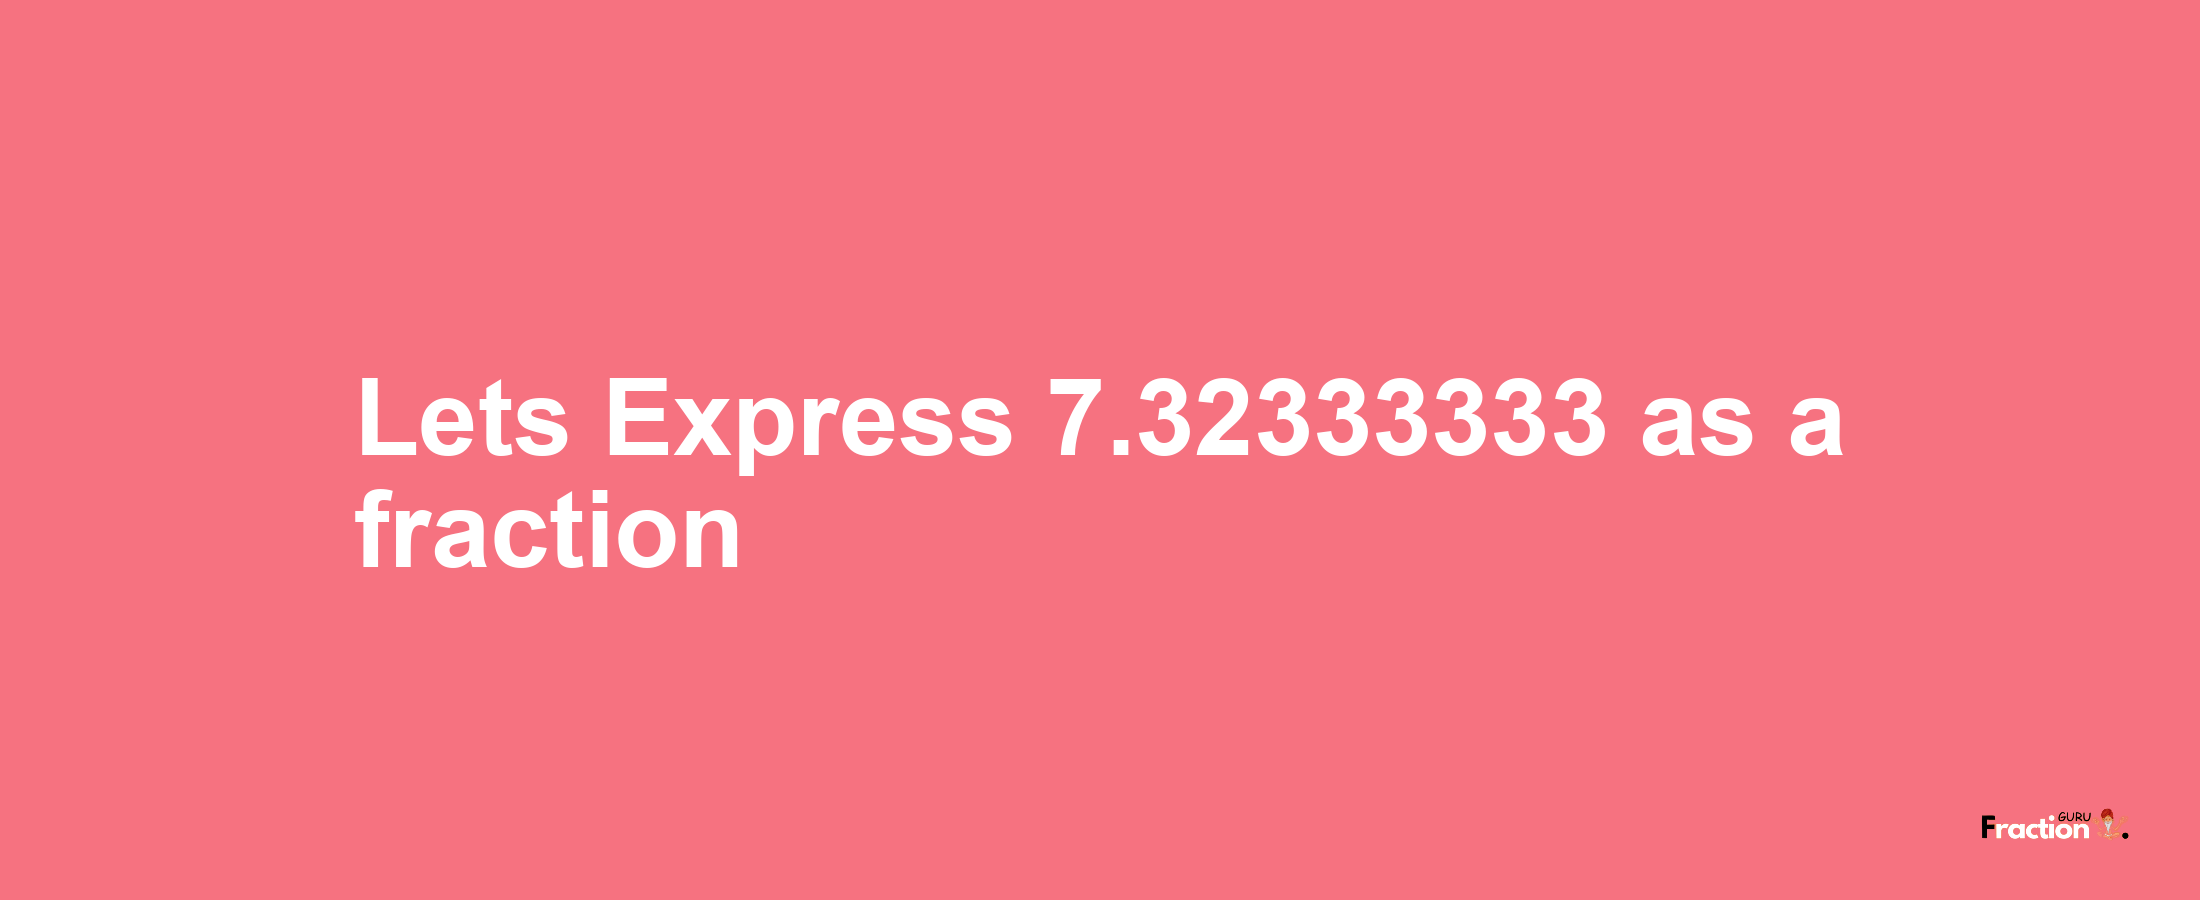 Lets Express 7.32333333 as afraction